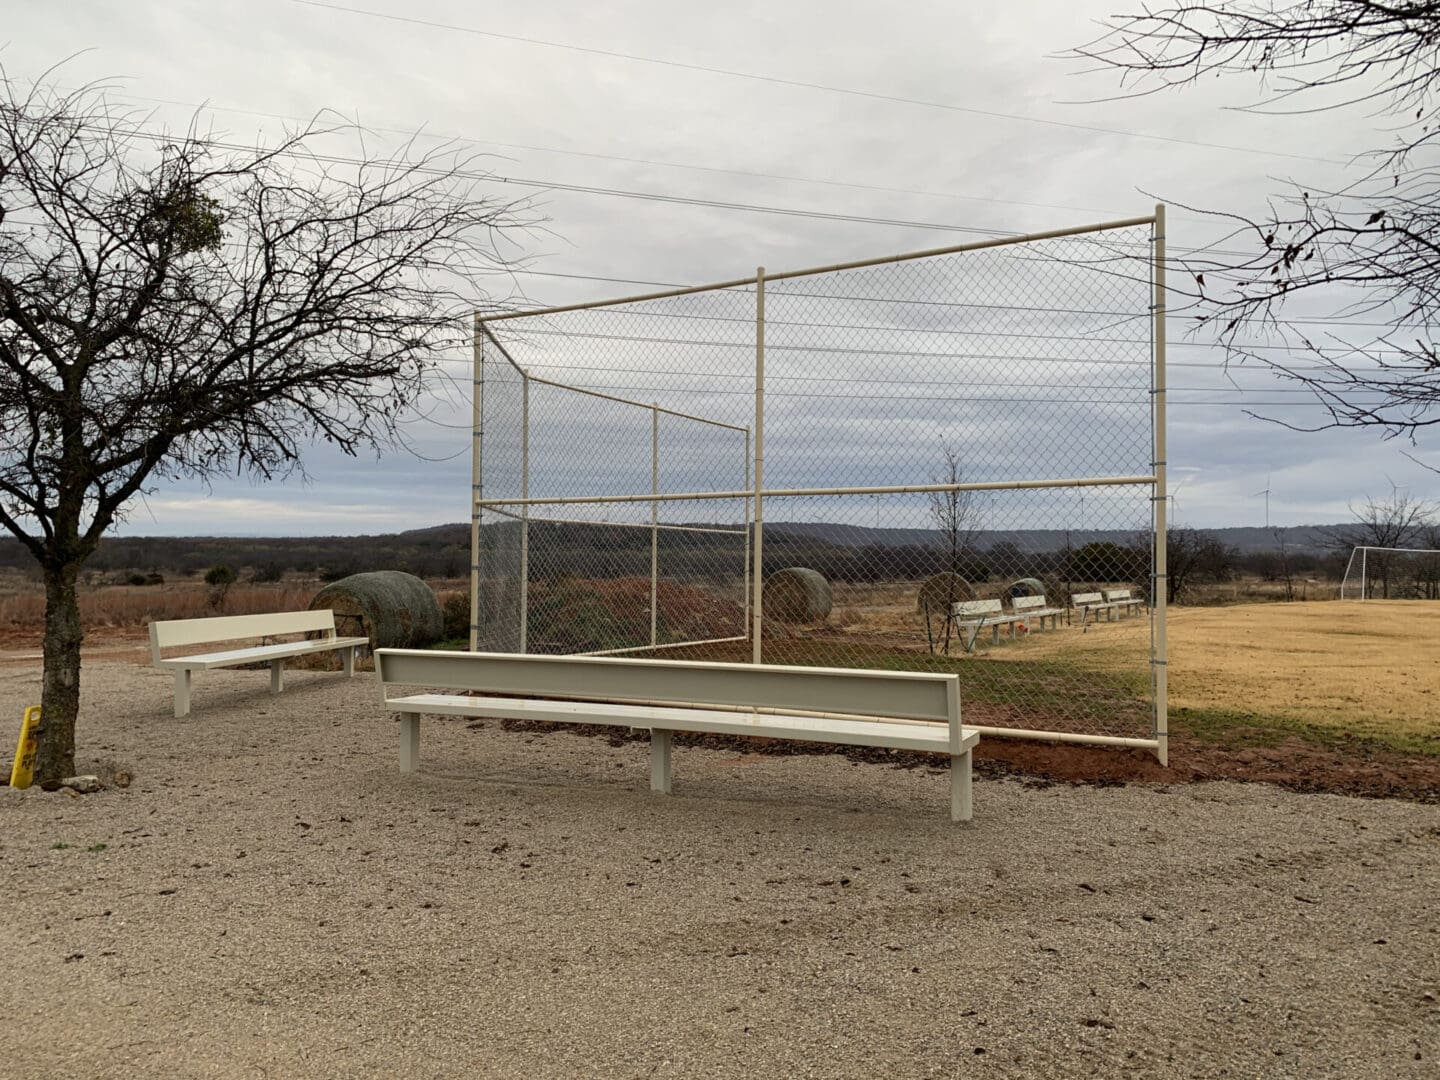 A bench in the middle of an empty field.